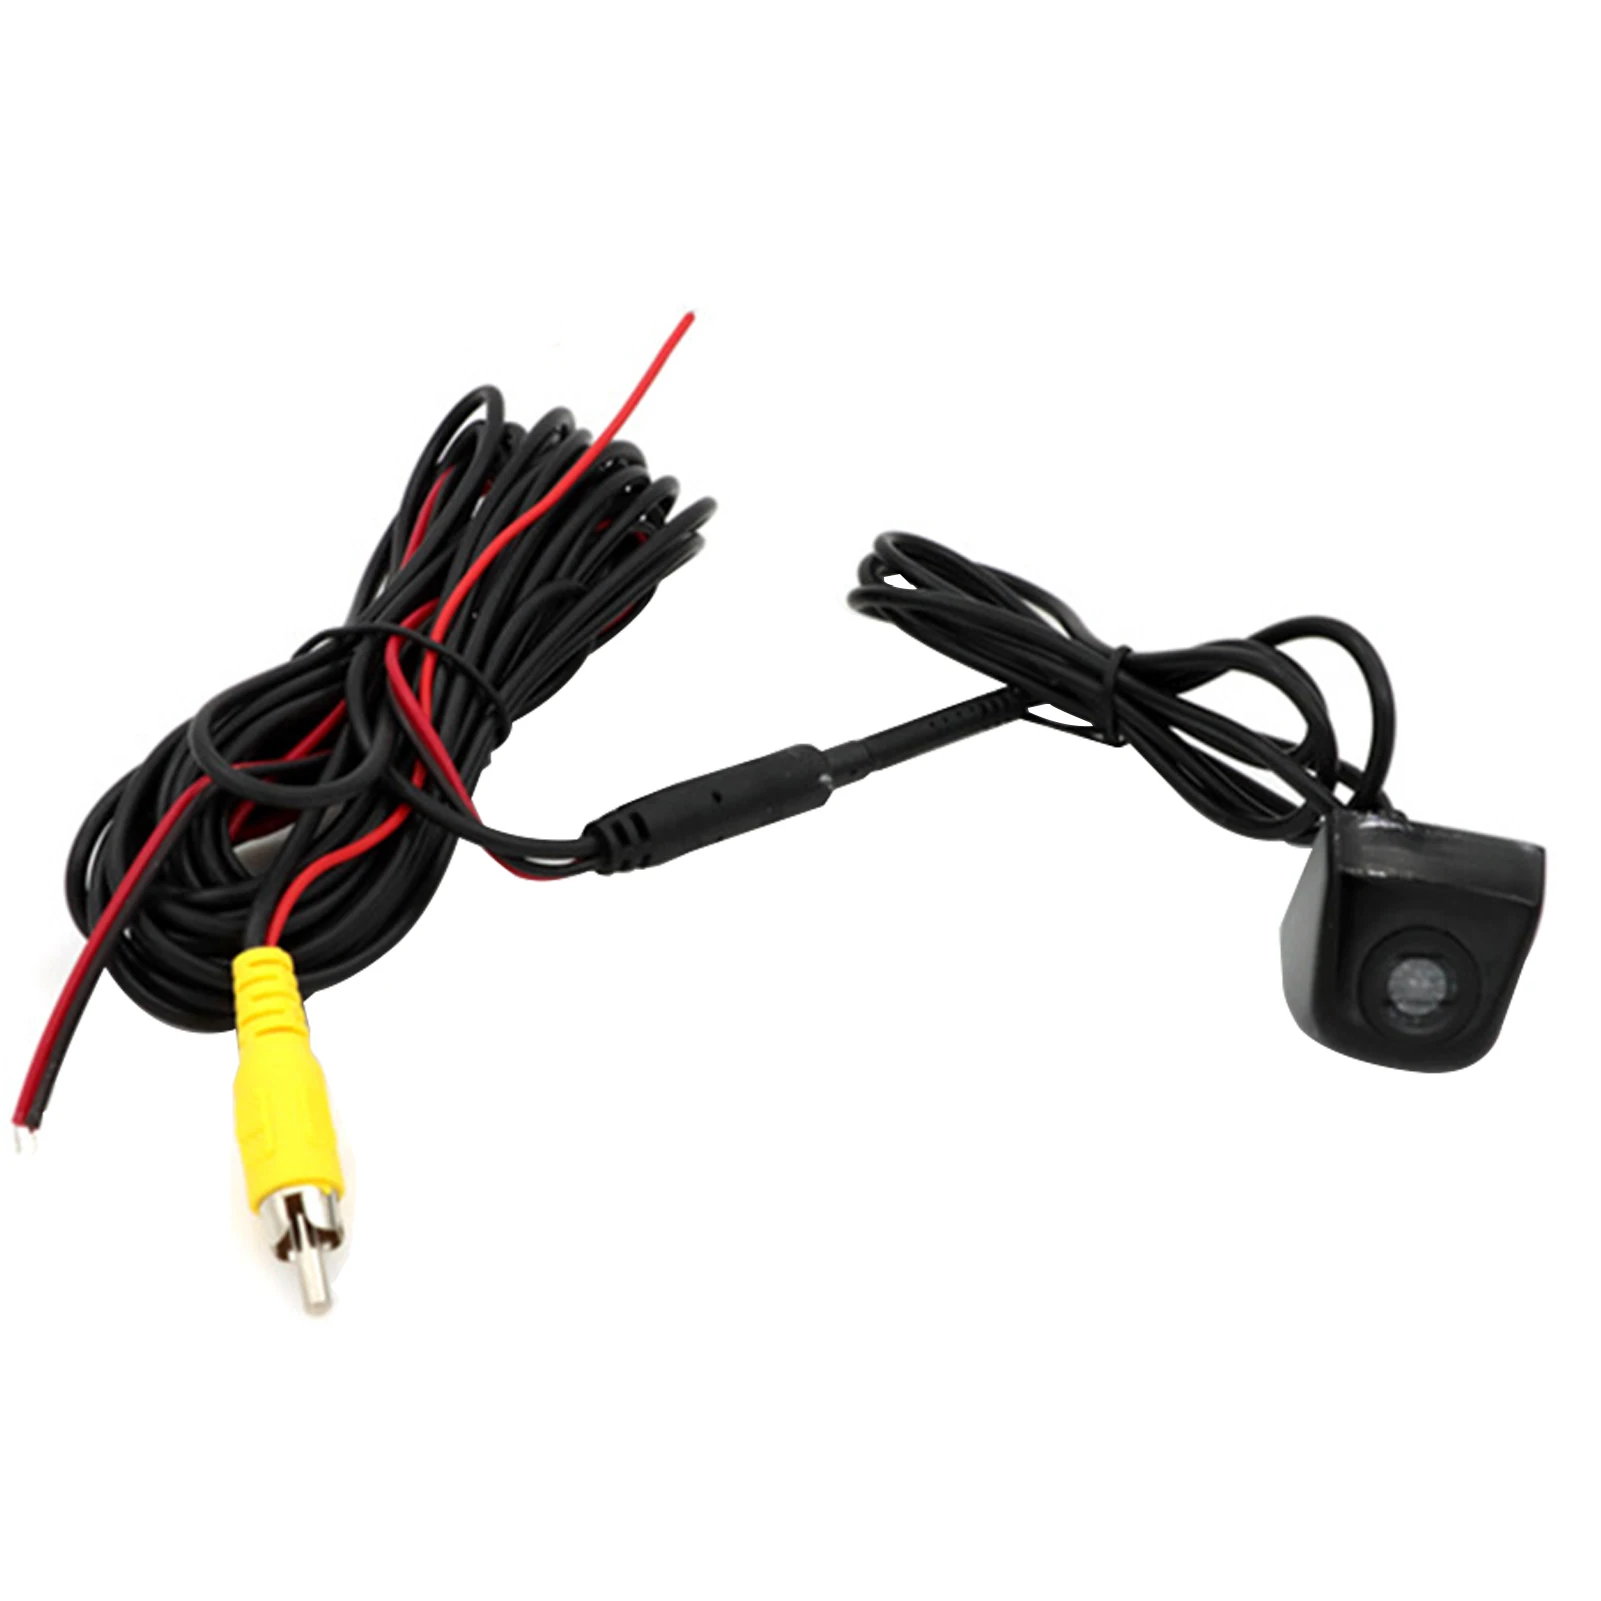 Automotive Rear View Camera Vehicle Back Up Camera AHD Reverse Camera For Nights 140 Wide Angle CVBS/AHD Rearview Camera For